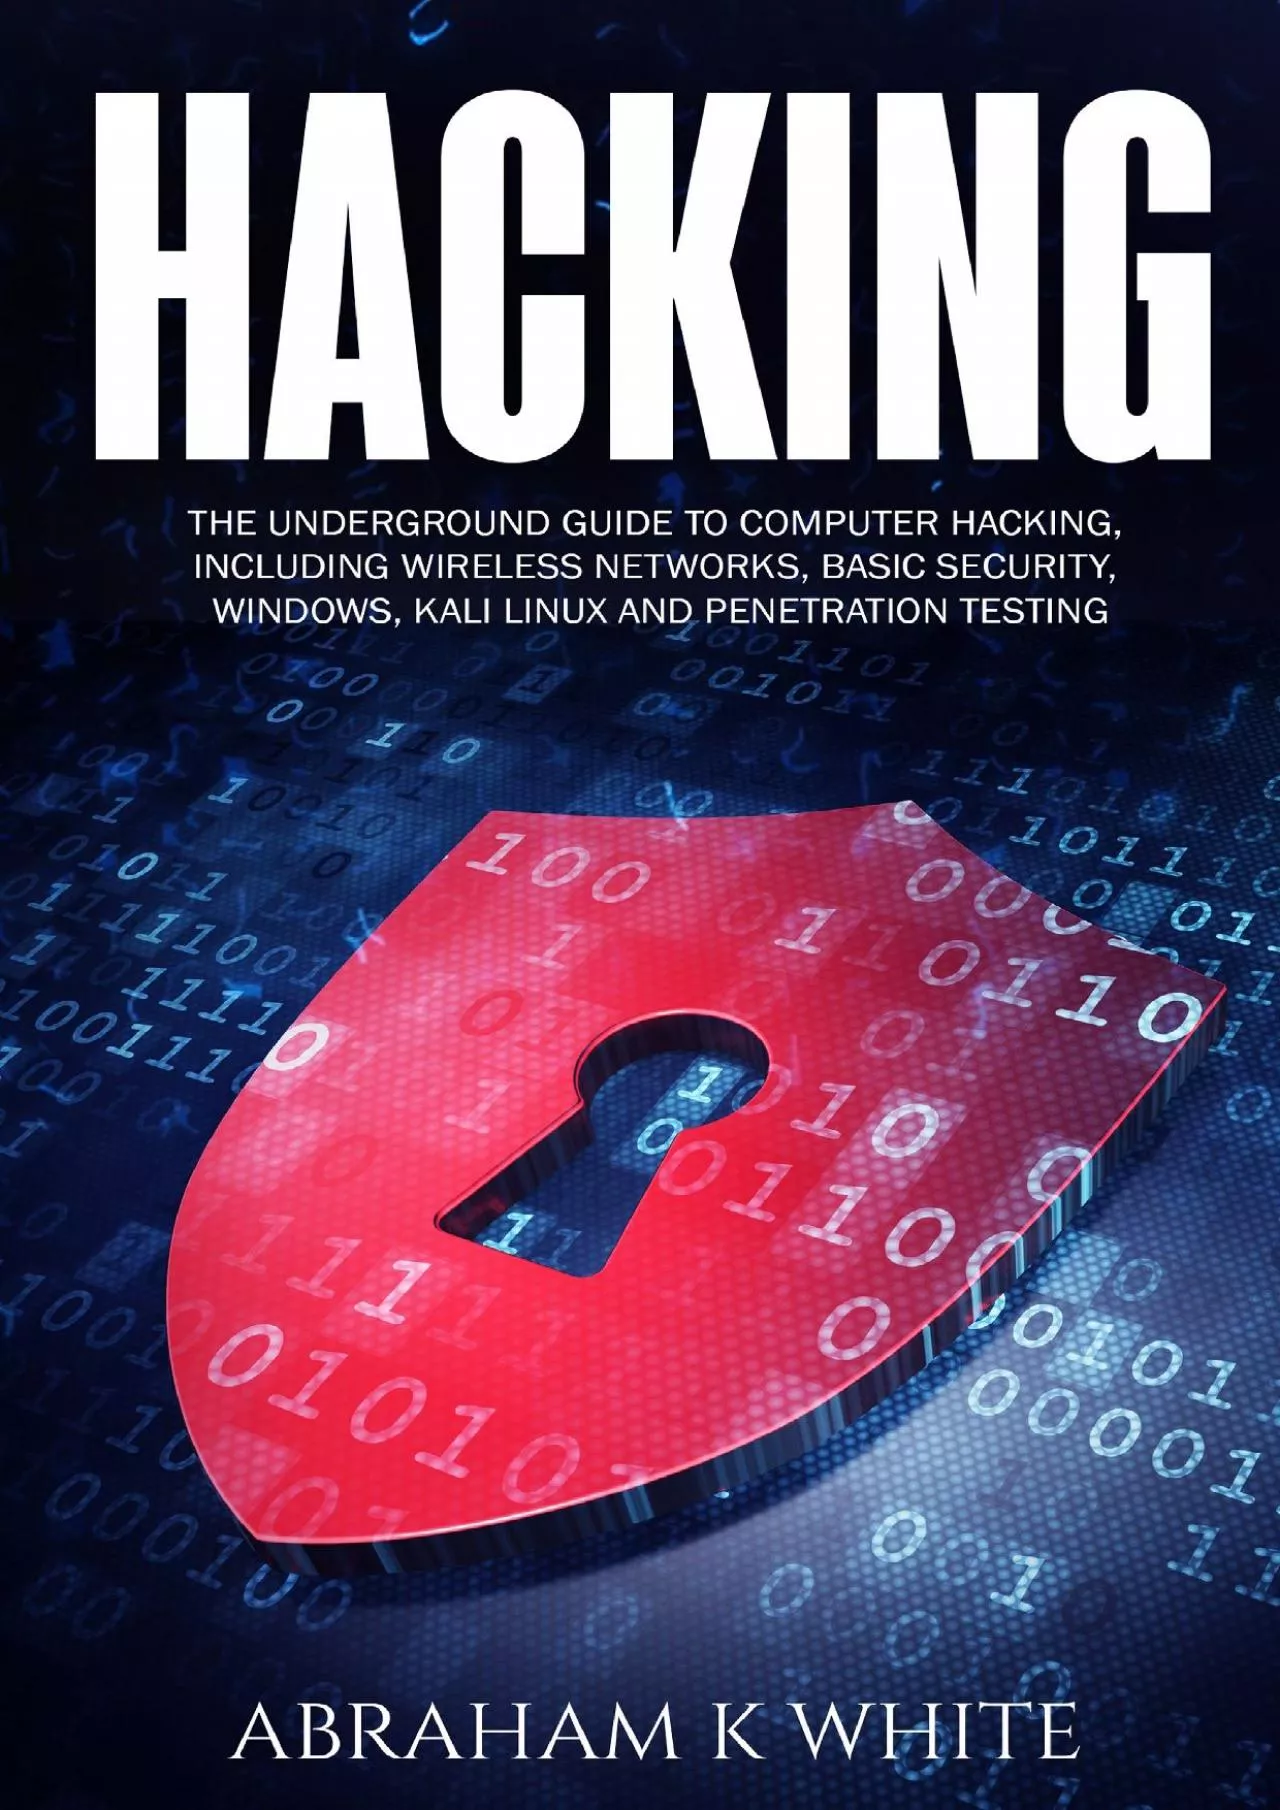 (BOOK)-Hacking: The Underground Guide to Computer Hacking, Including Wireless Networks,